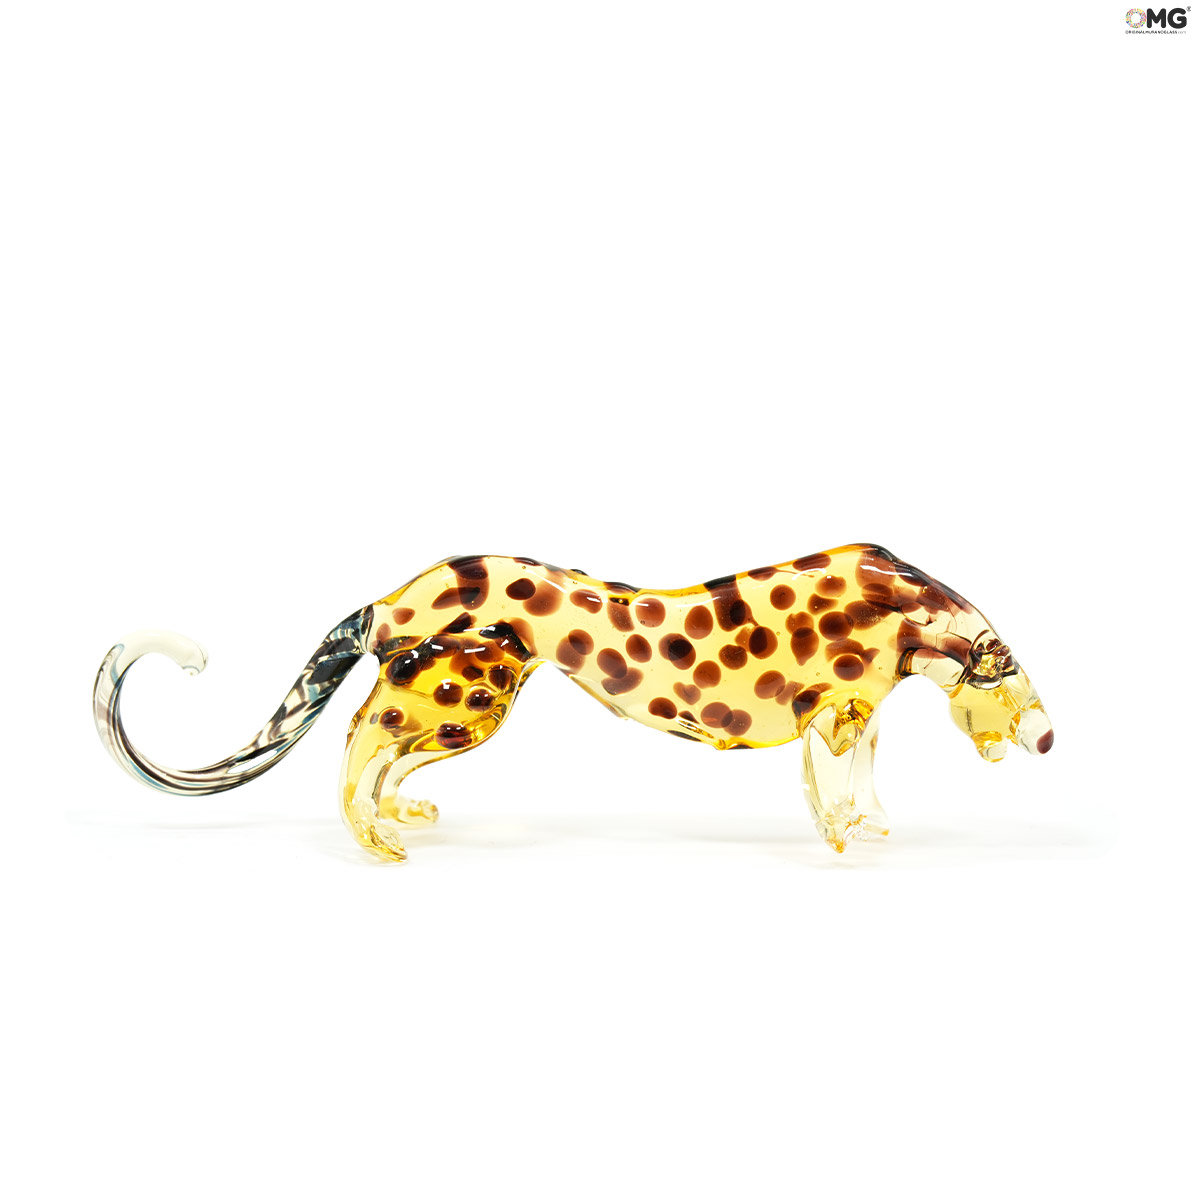 Sculptures & Figurines - Objects of Art glass - Various Collections: Cheetah  figurine - Original Murano Glass OMG